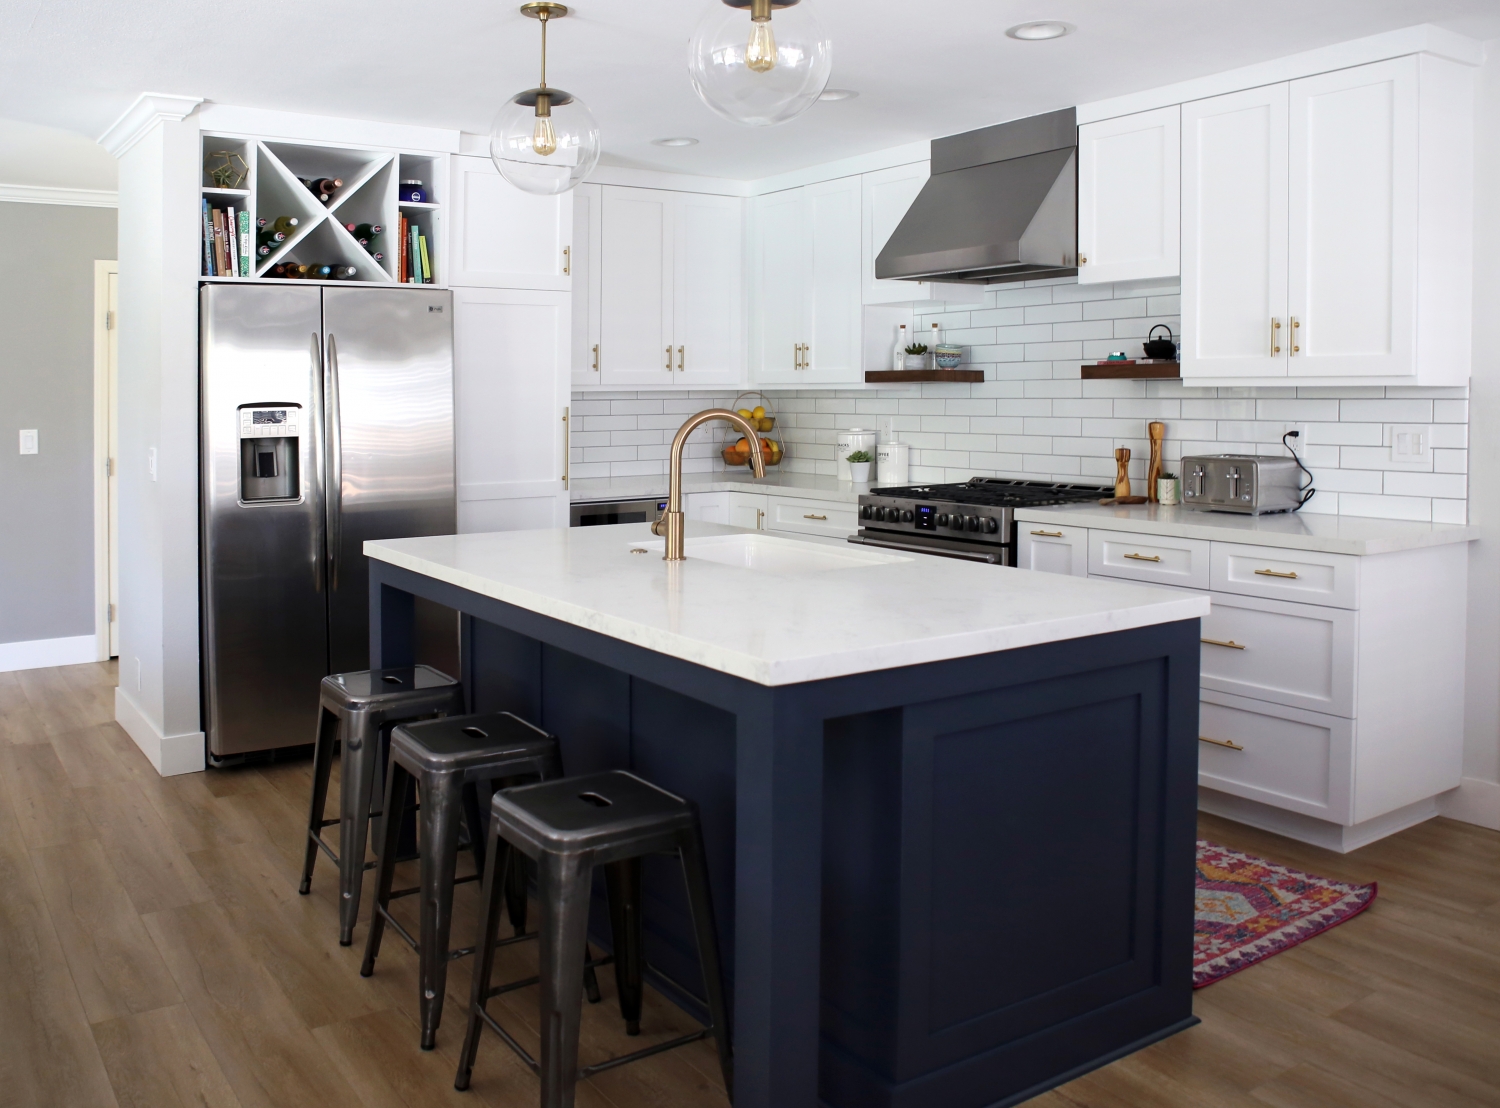 Londonderry Kitchen Remodel - Satin and Slate Interiors